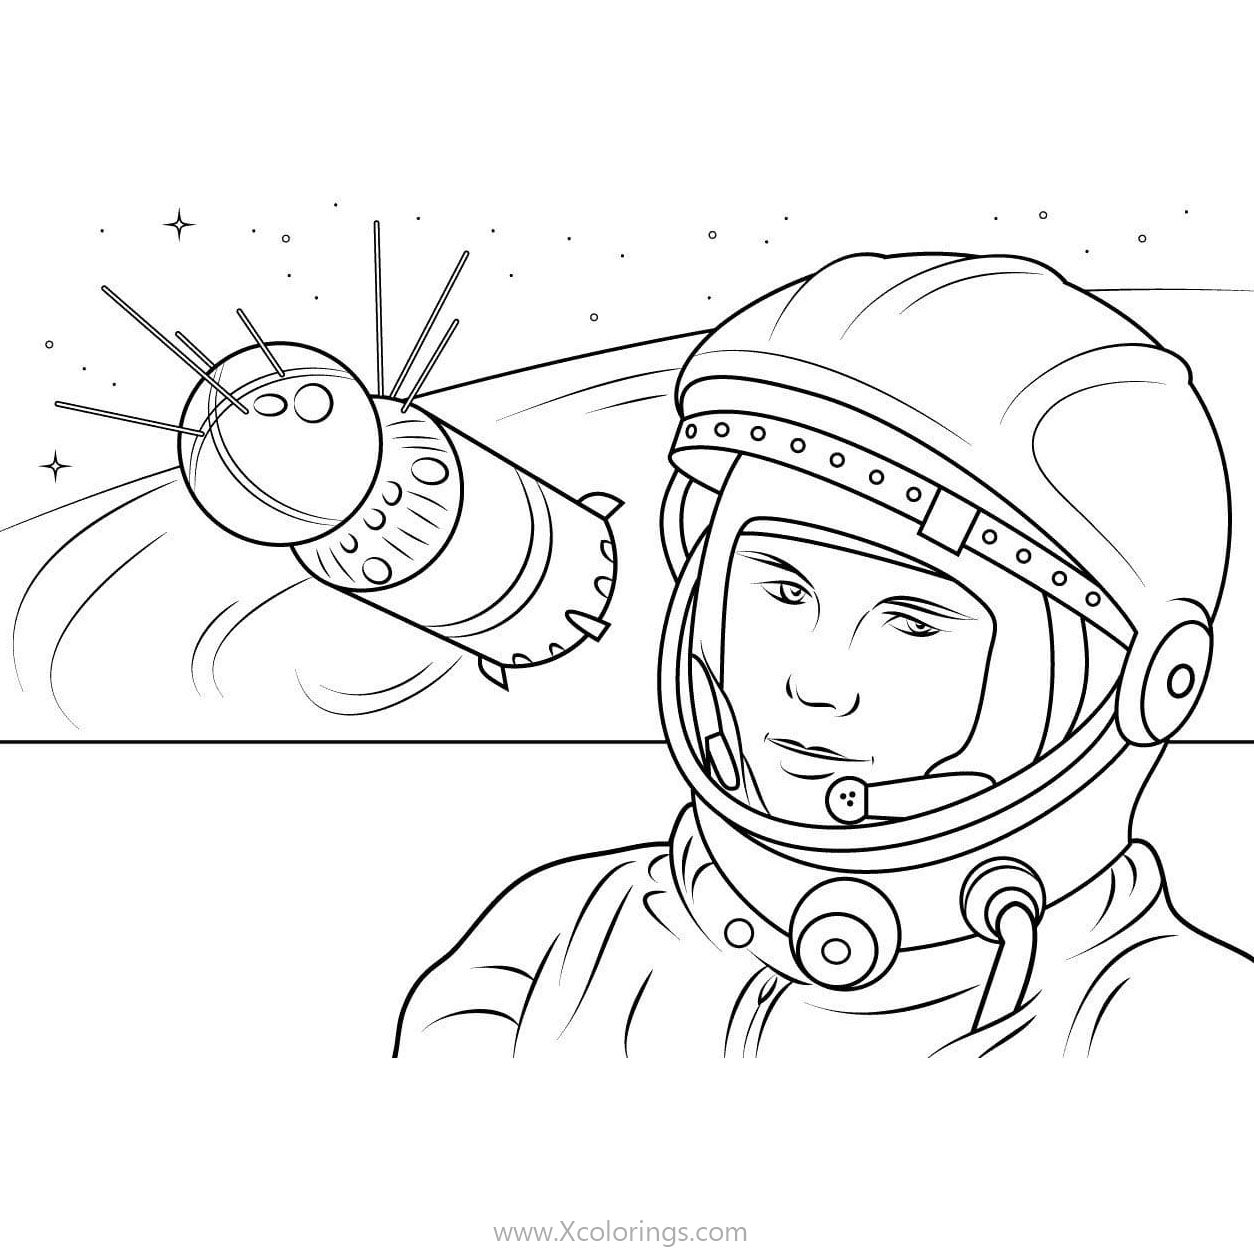 Free Astronaut Coloring Pages Yuri Gagarin printable